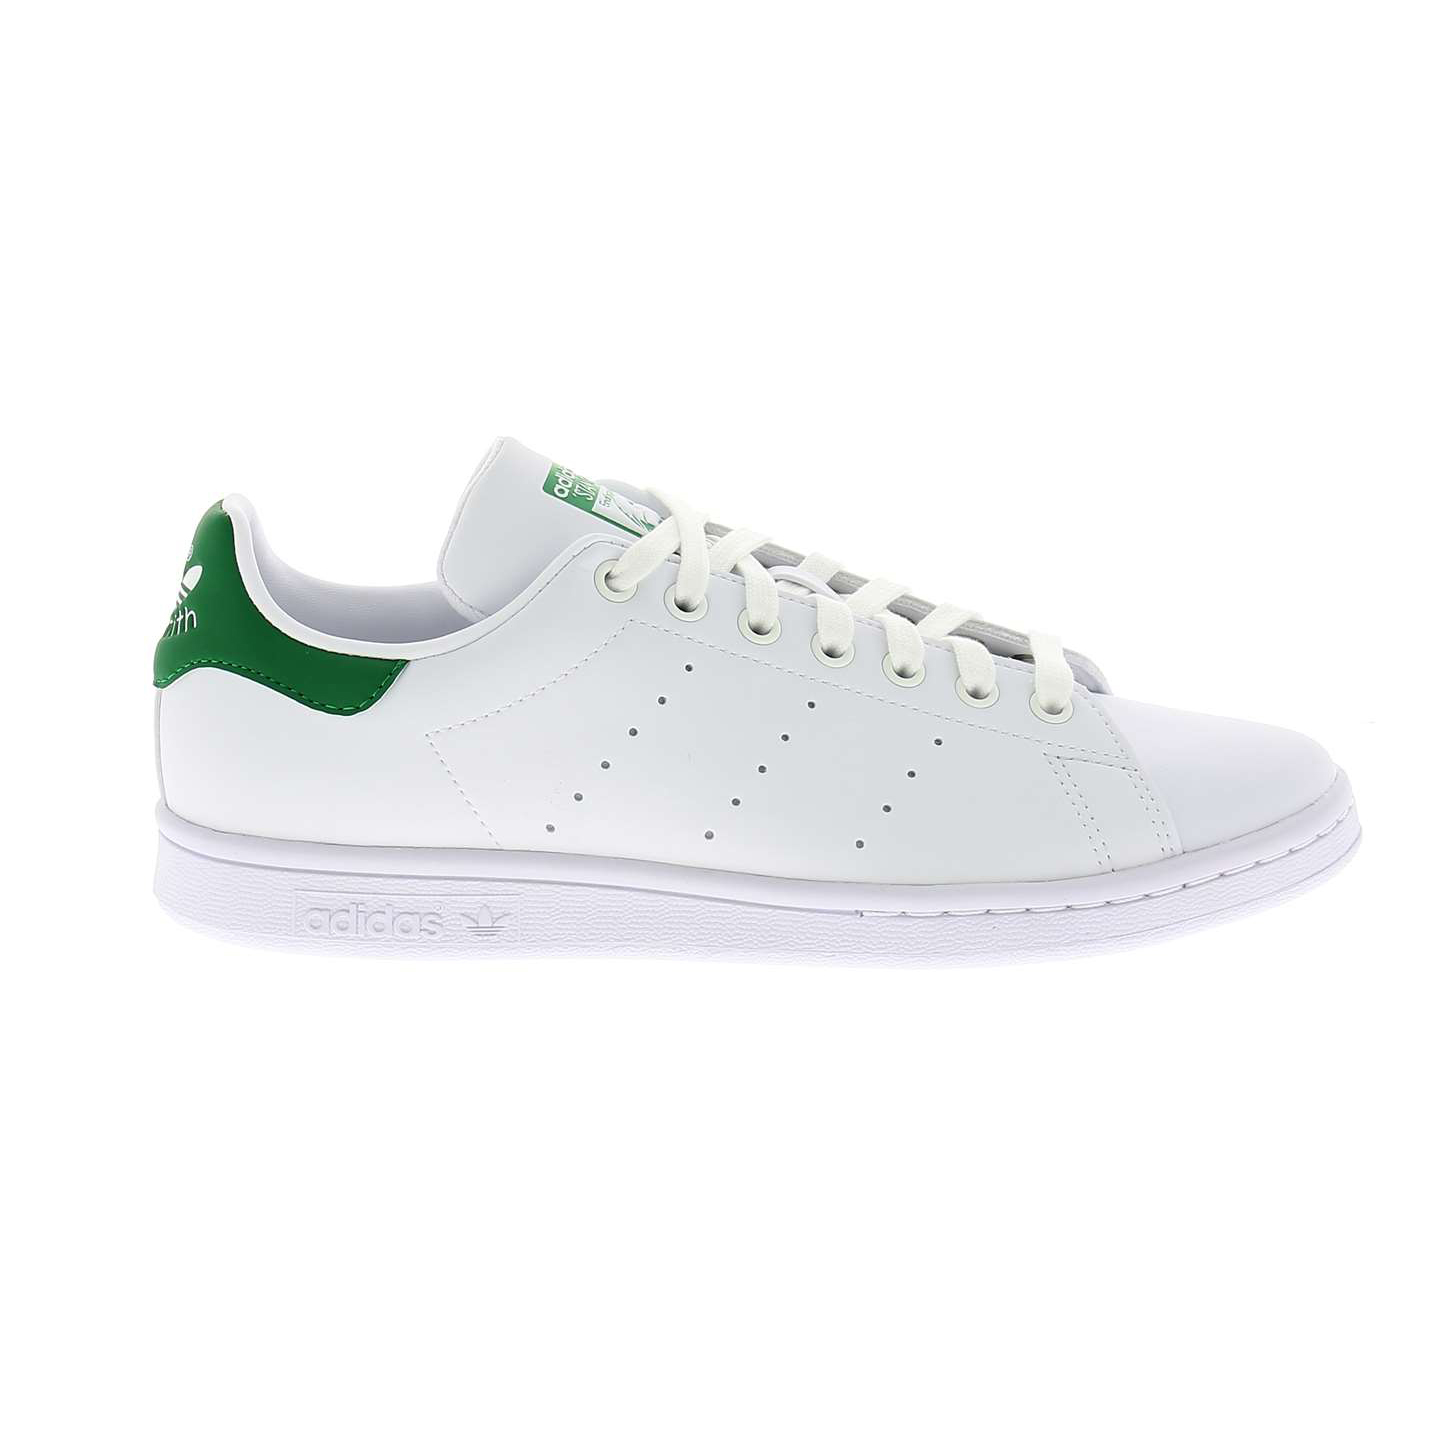 02 - STAN SMITH - ADIDAS - Baskets - Synthétique